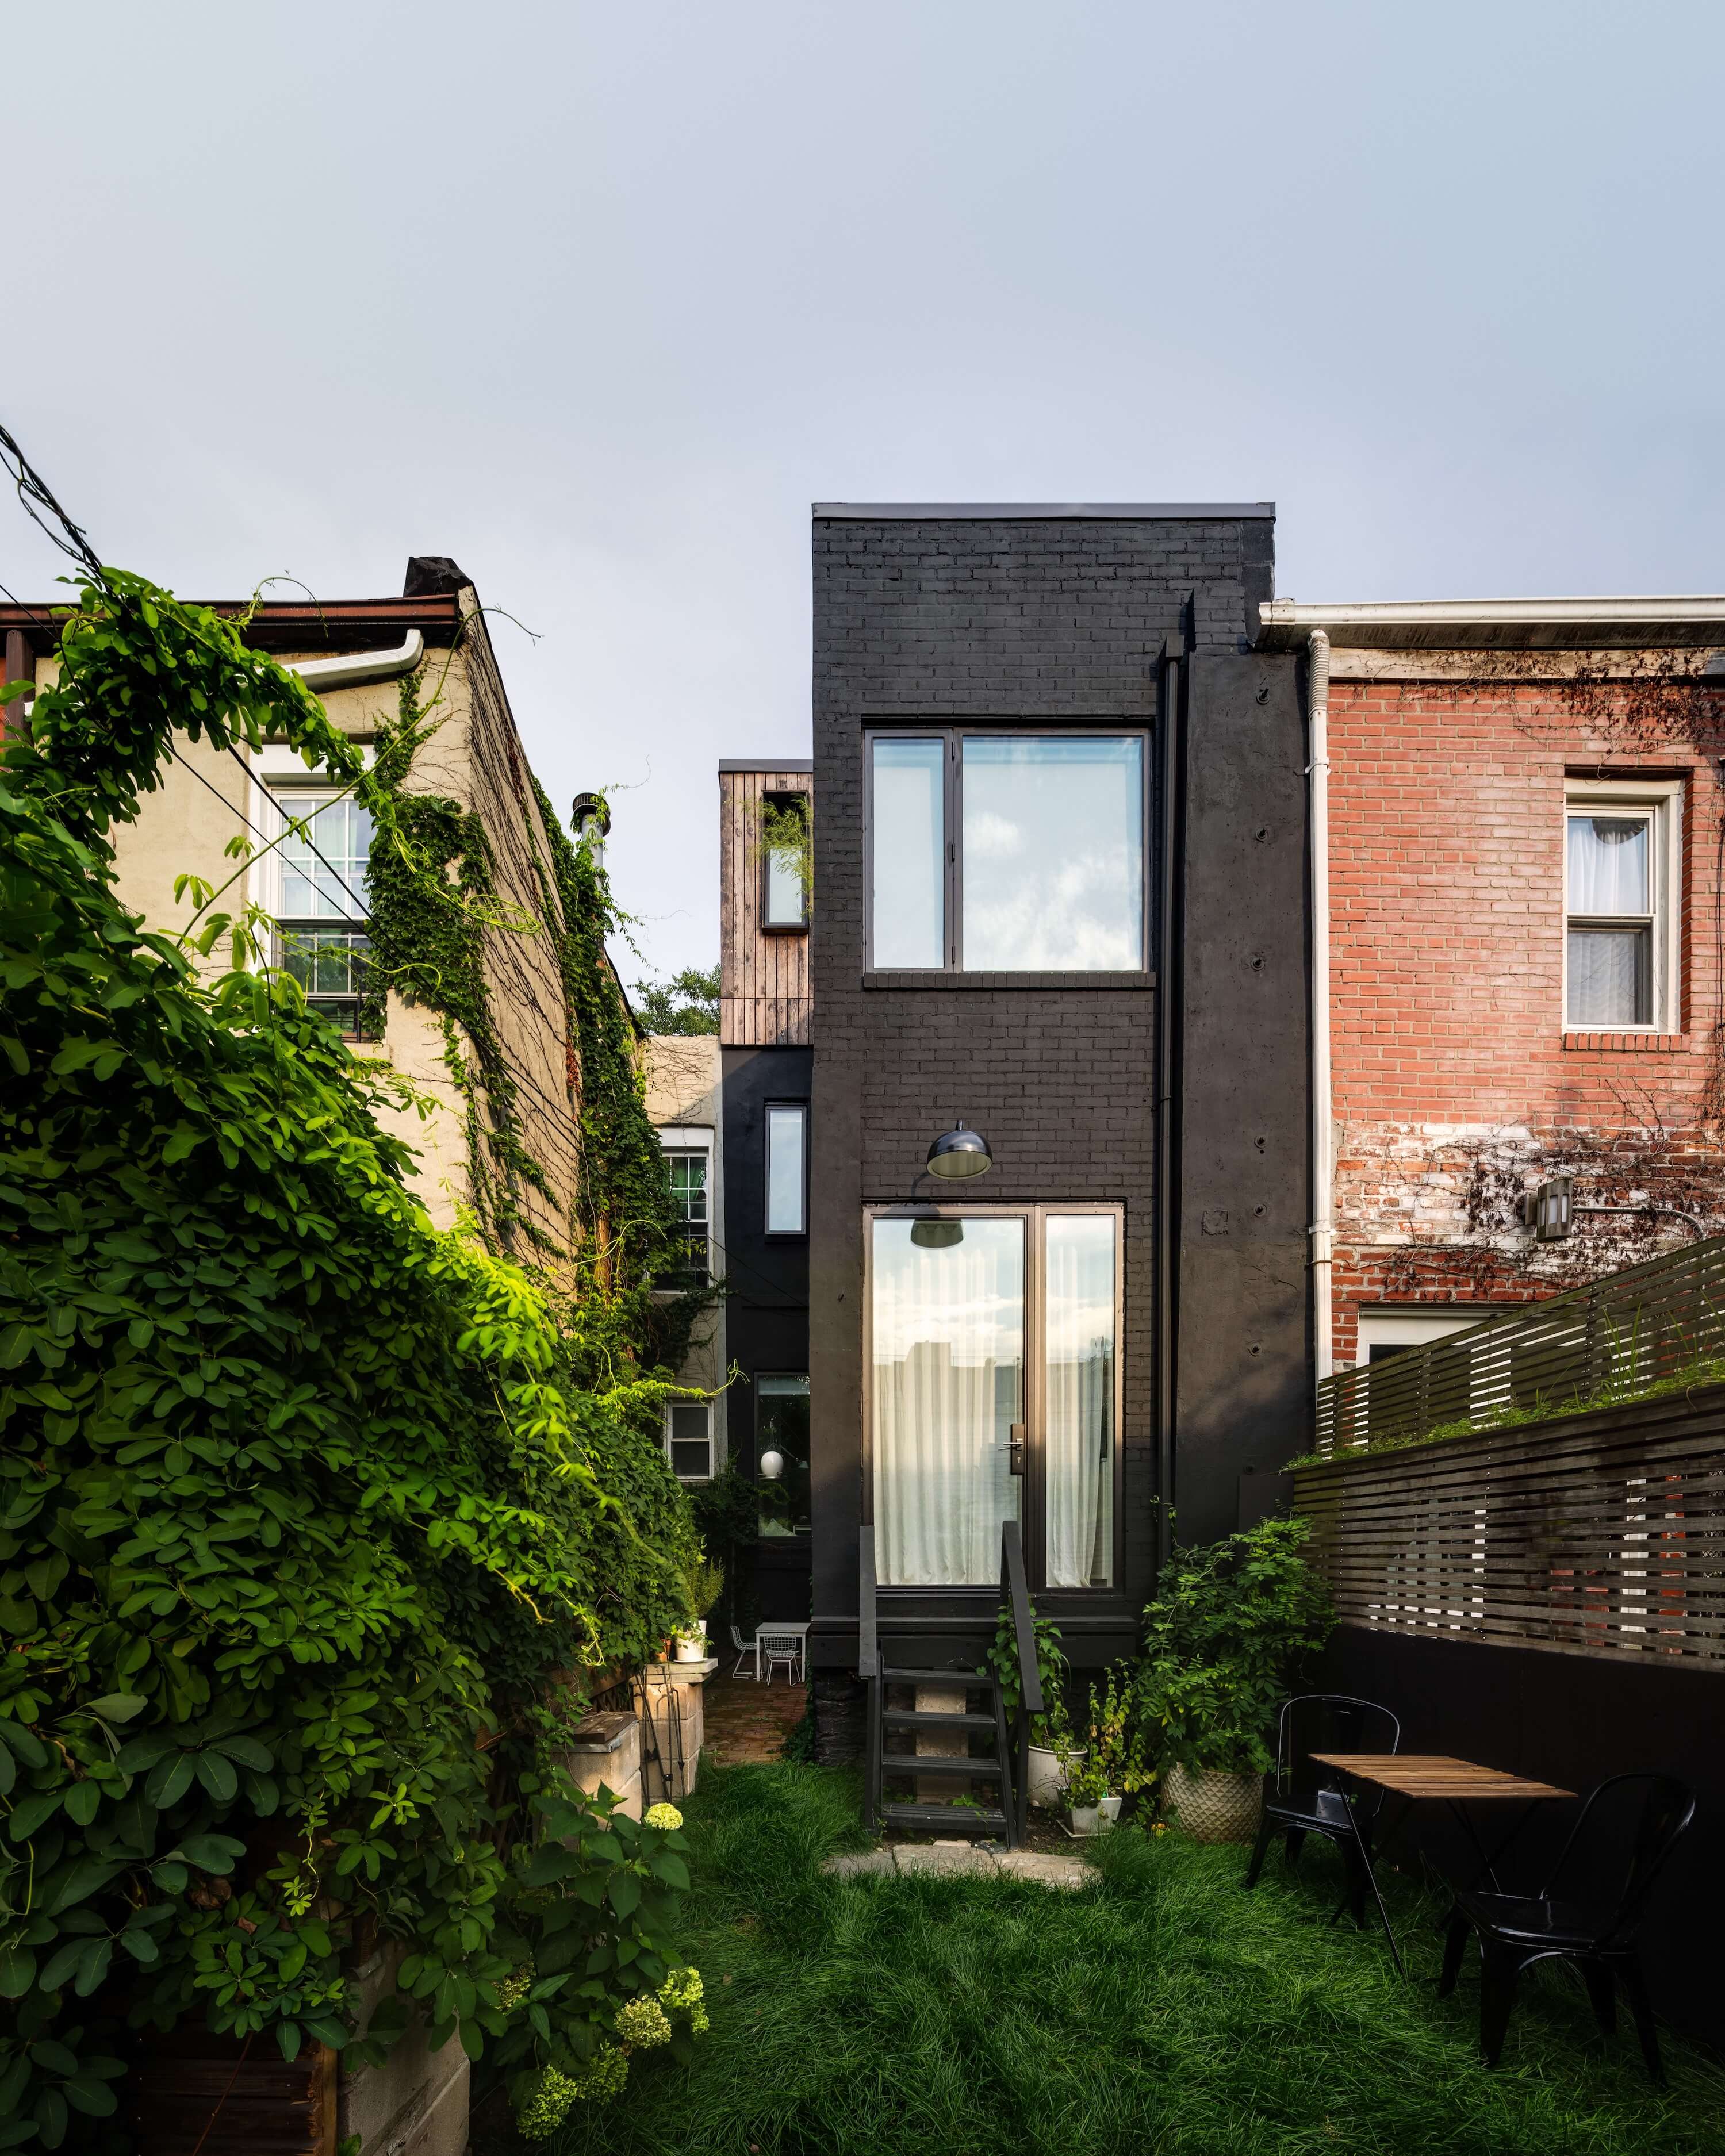 Little House. Big City by Office of Architecture